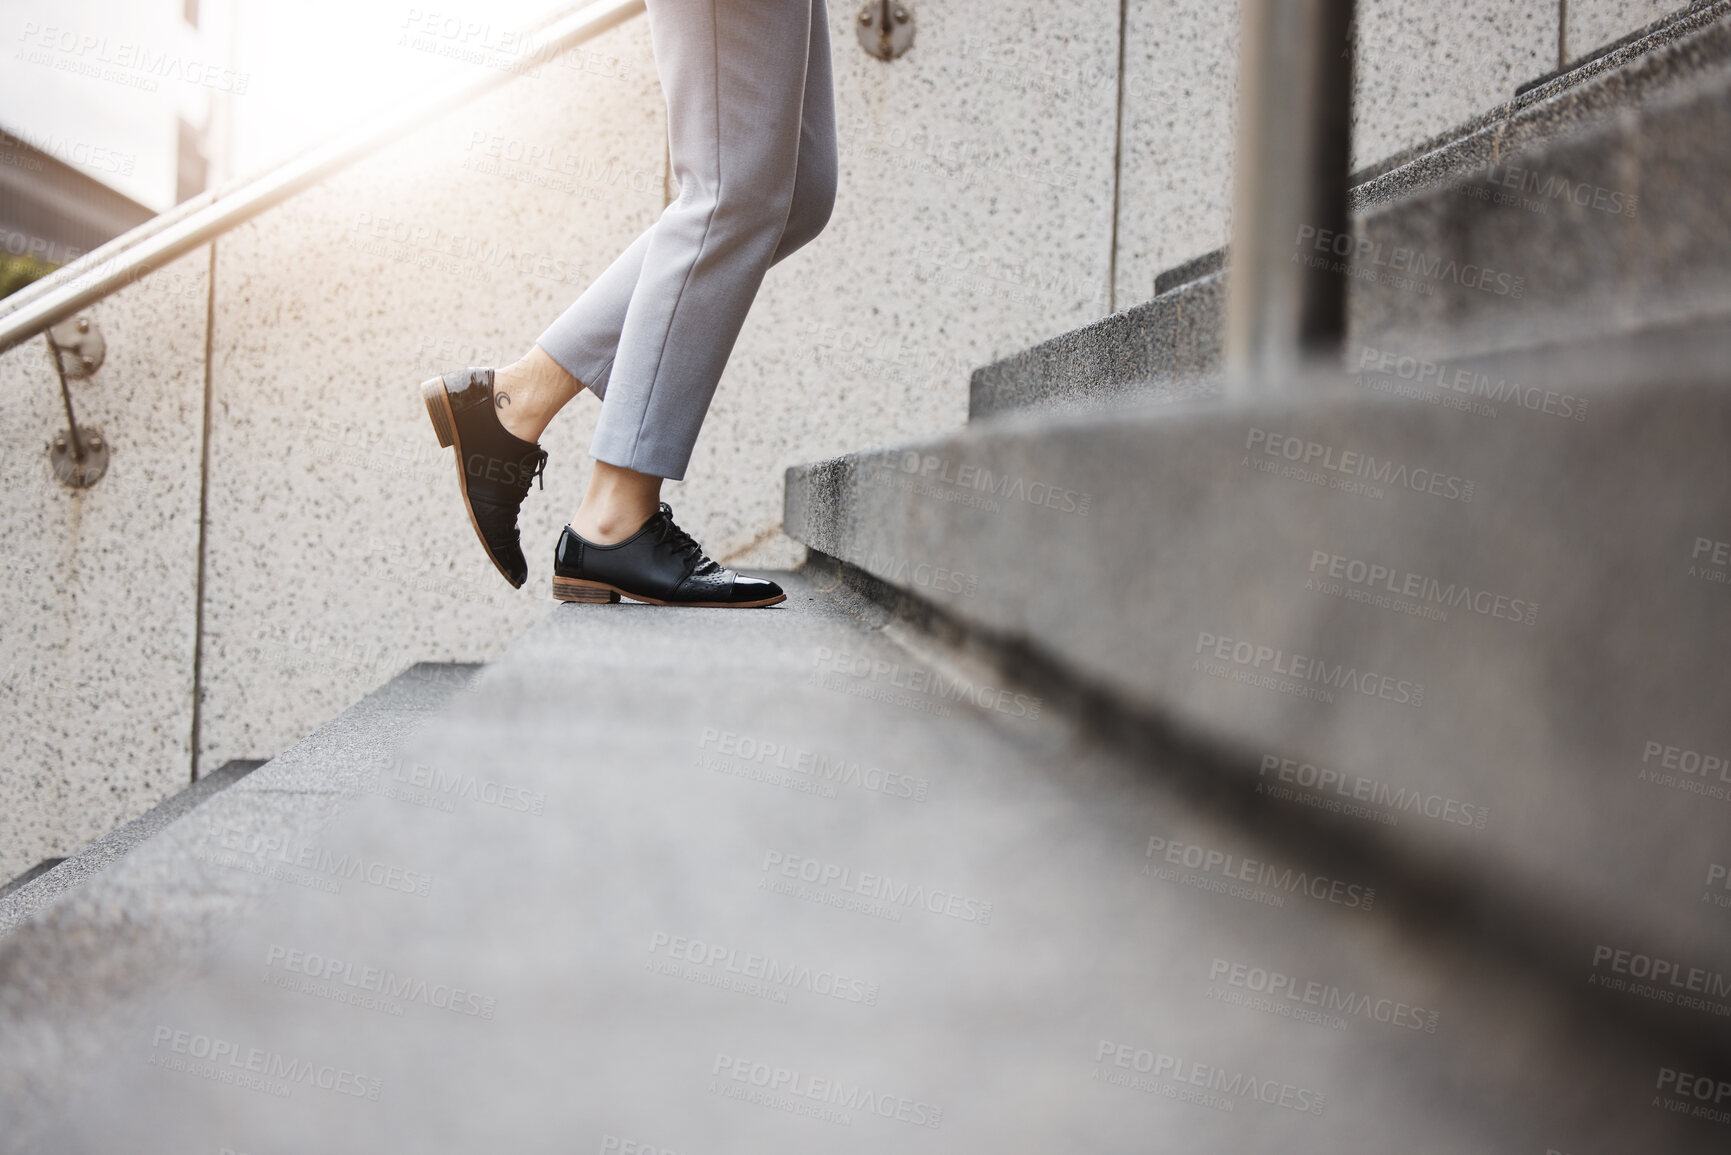 Buy stock photo Stairs, morning person and legs walk, travel or on urban journey, outdoor commute or trip to work, destination or job. Town steps, arrival and closeup shoes, feet or agent climbing building staircase